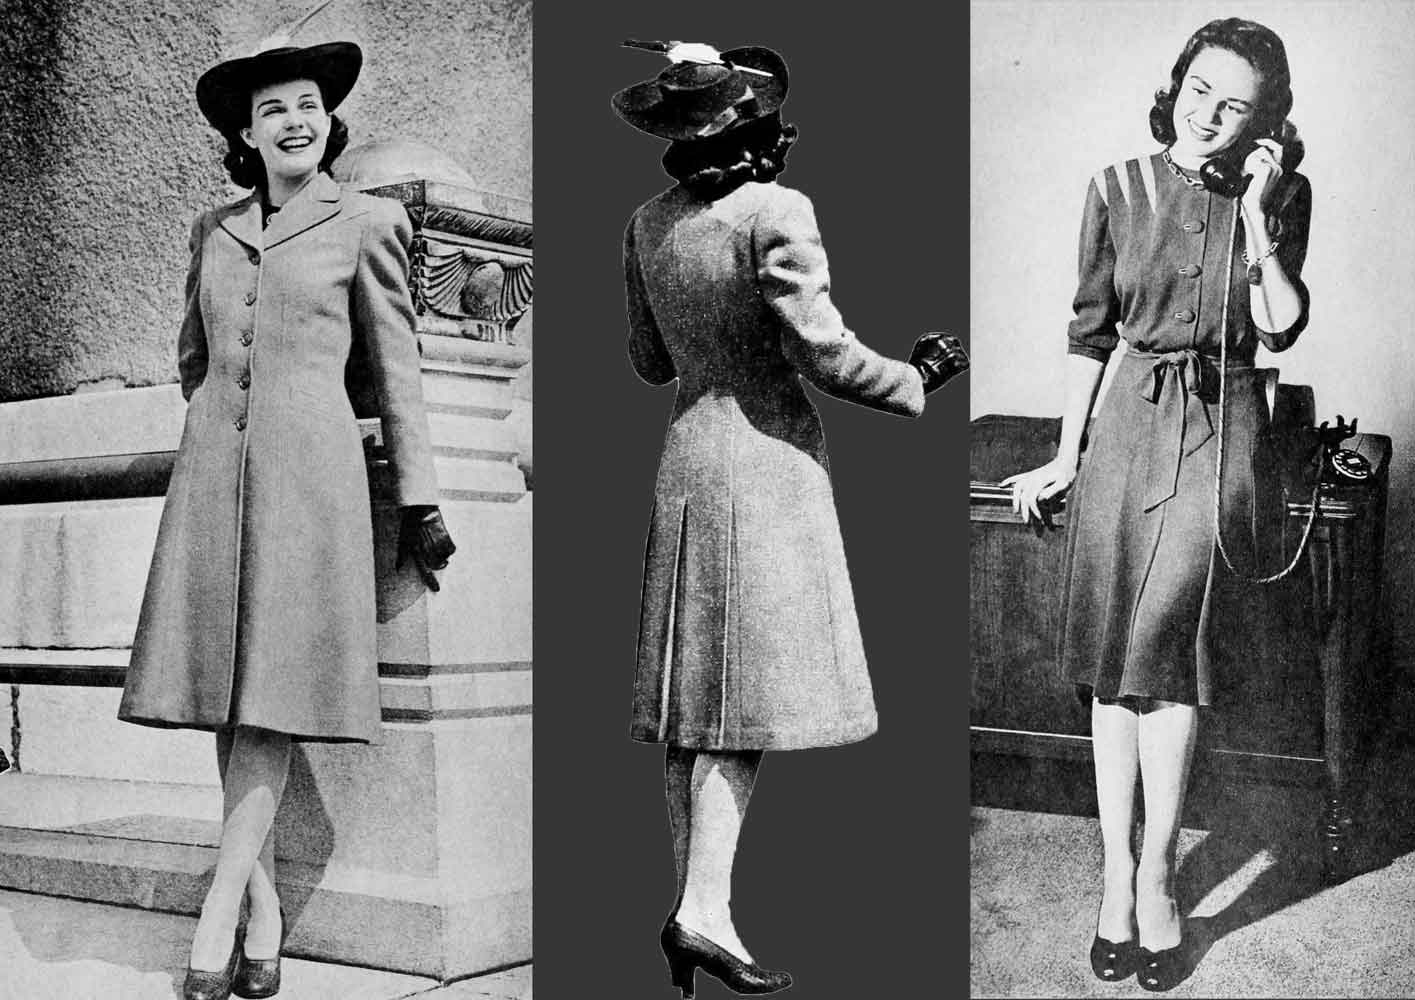 1940s-Fashion---The-Winter-Dress-and-Coat-combo-of-1941